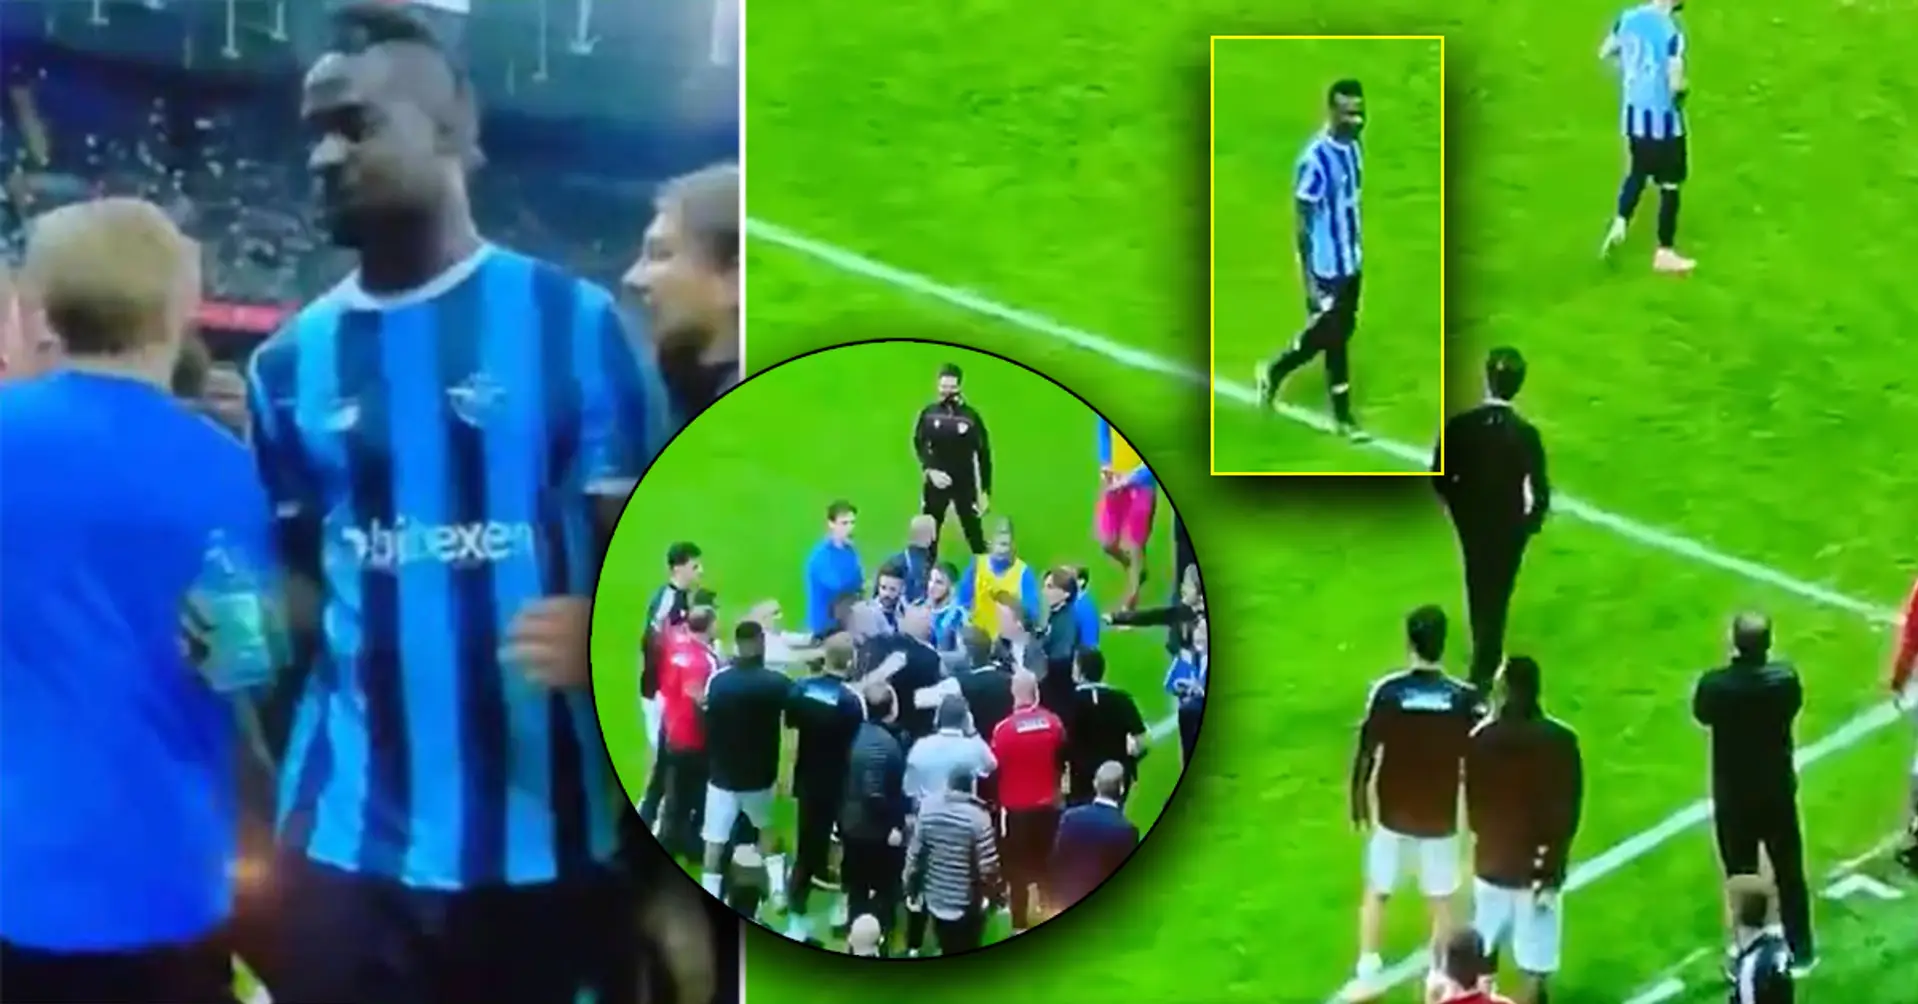 Mario Balotelli celebrates in front of coach who called him ‘brainless’, starts a fight on pitch